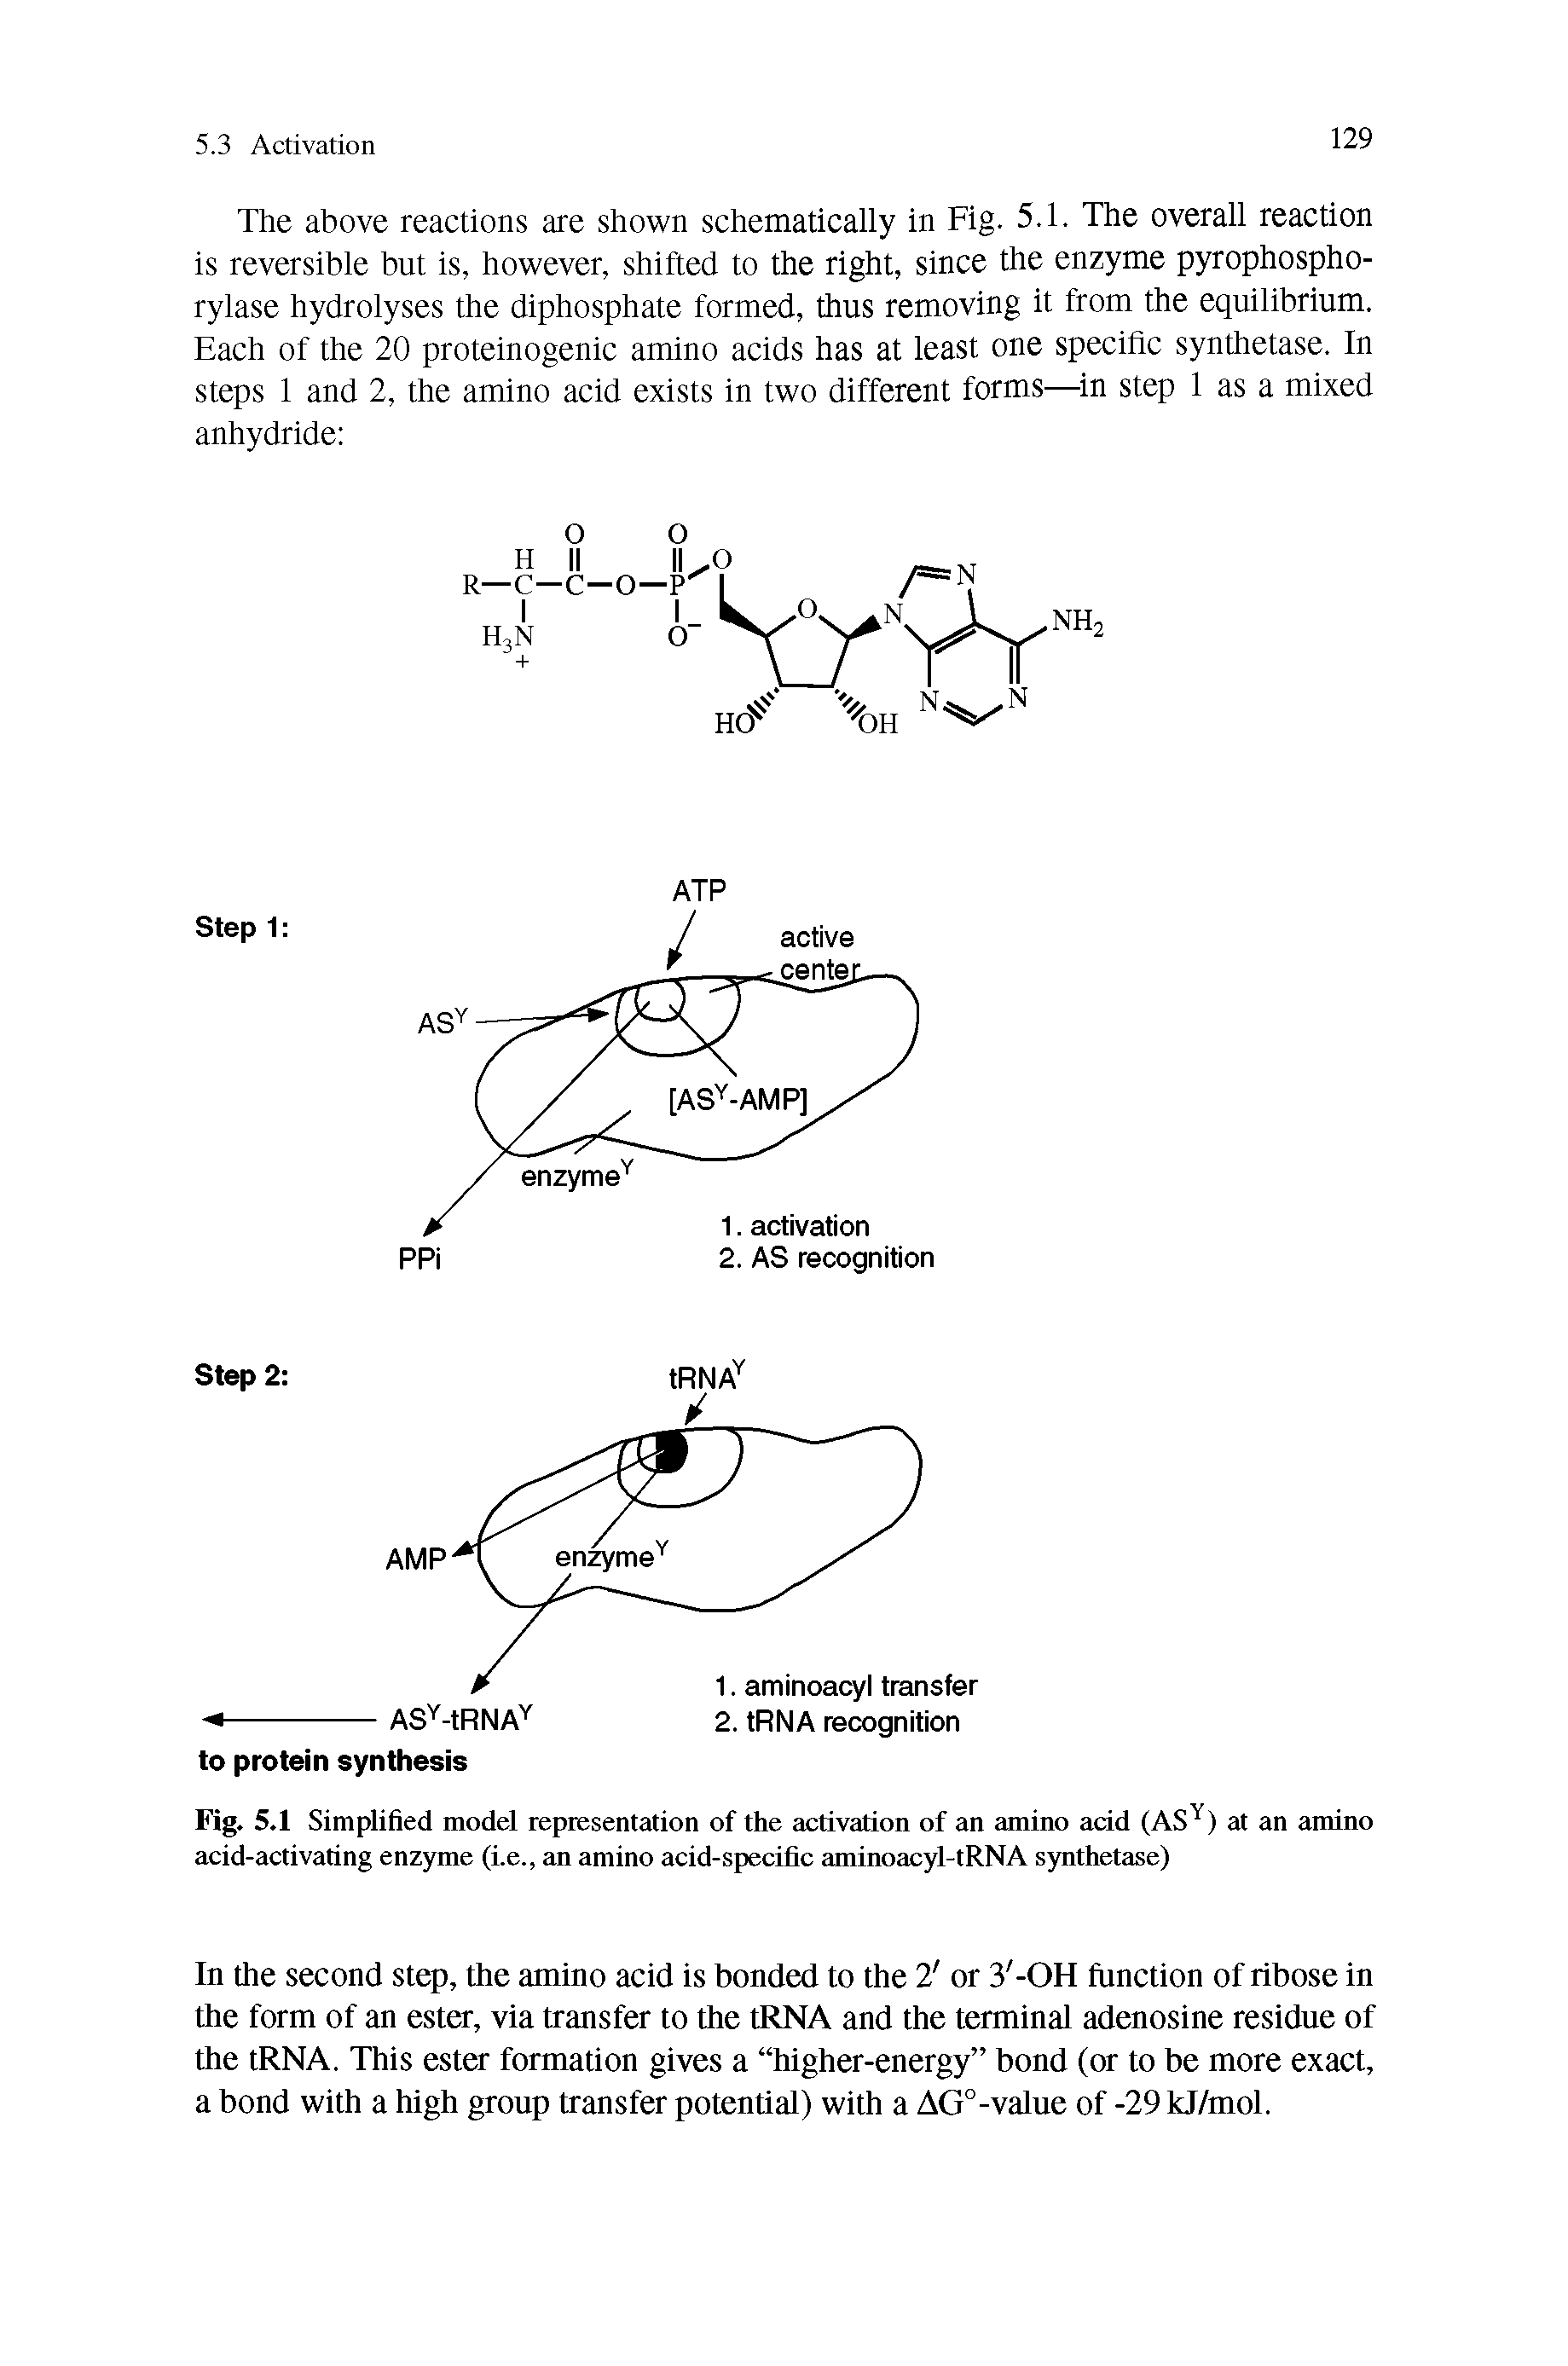 Fig. 5.1 Simplified model representation of the activation of an amino acid (ASY) at an amino acid-activating enzyme (i.e., an amino acid-specific aminoacyl-tRNA synthetase)...